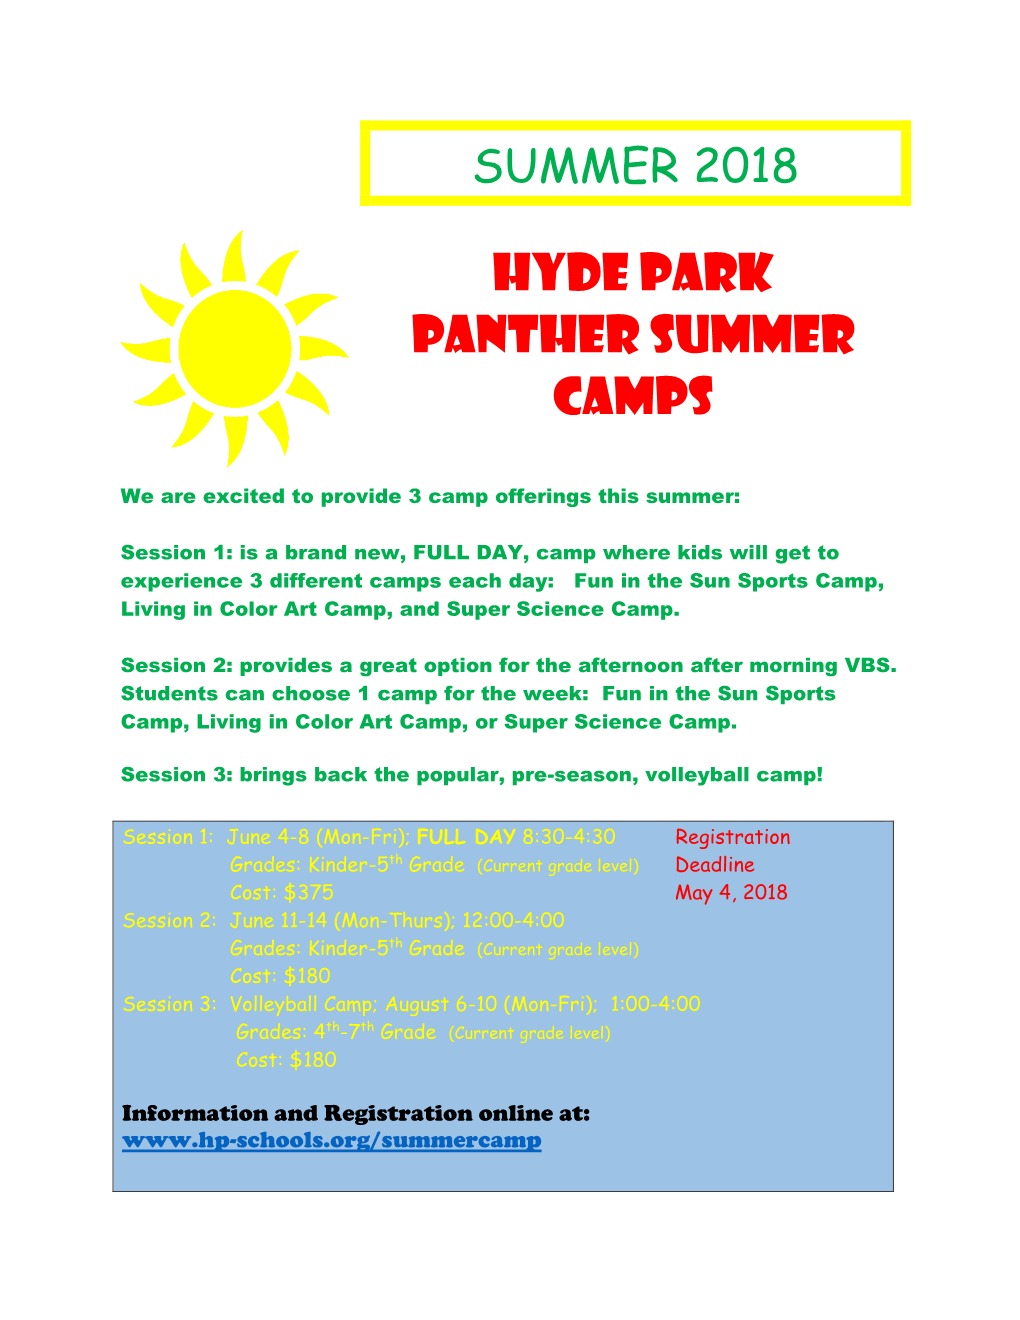 Hyde Park Panther Summer Camps